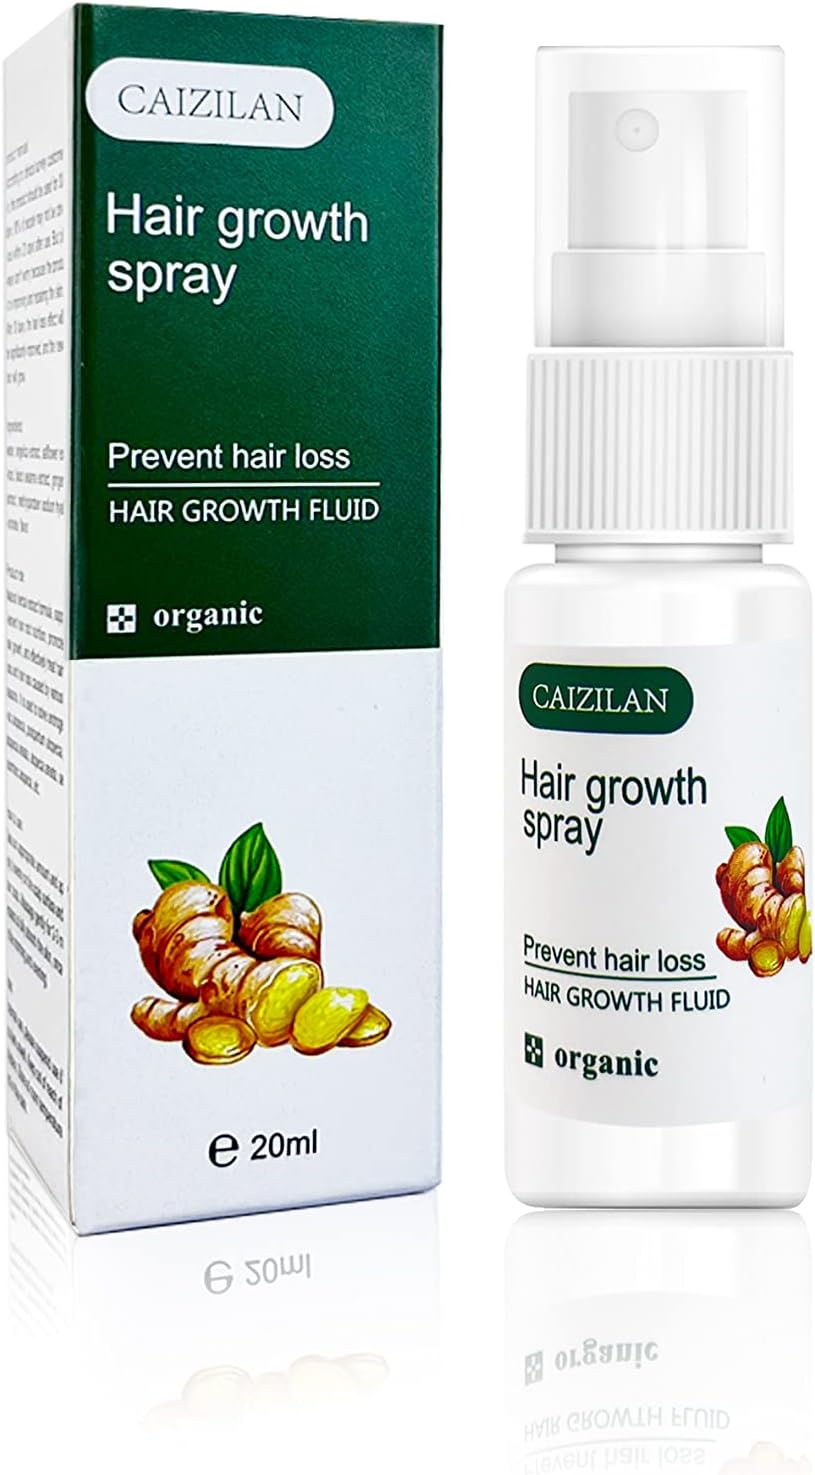 Ginger Hair Growth Serum Spray, Wild Growth Hair Oil for Hair Loss Treatments for Men and Women, Natural Hair Growth Accelerator for Stronger,Thicker,Longer Hair -20 ml Beard and Hair Growth Products